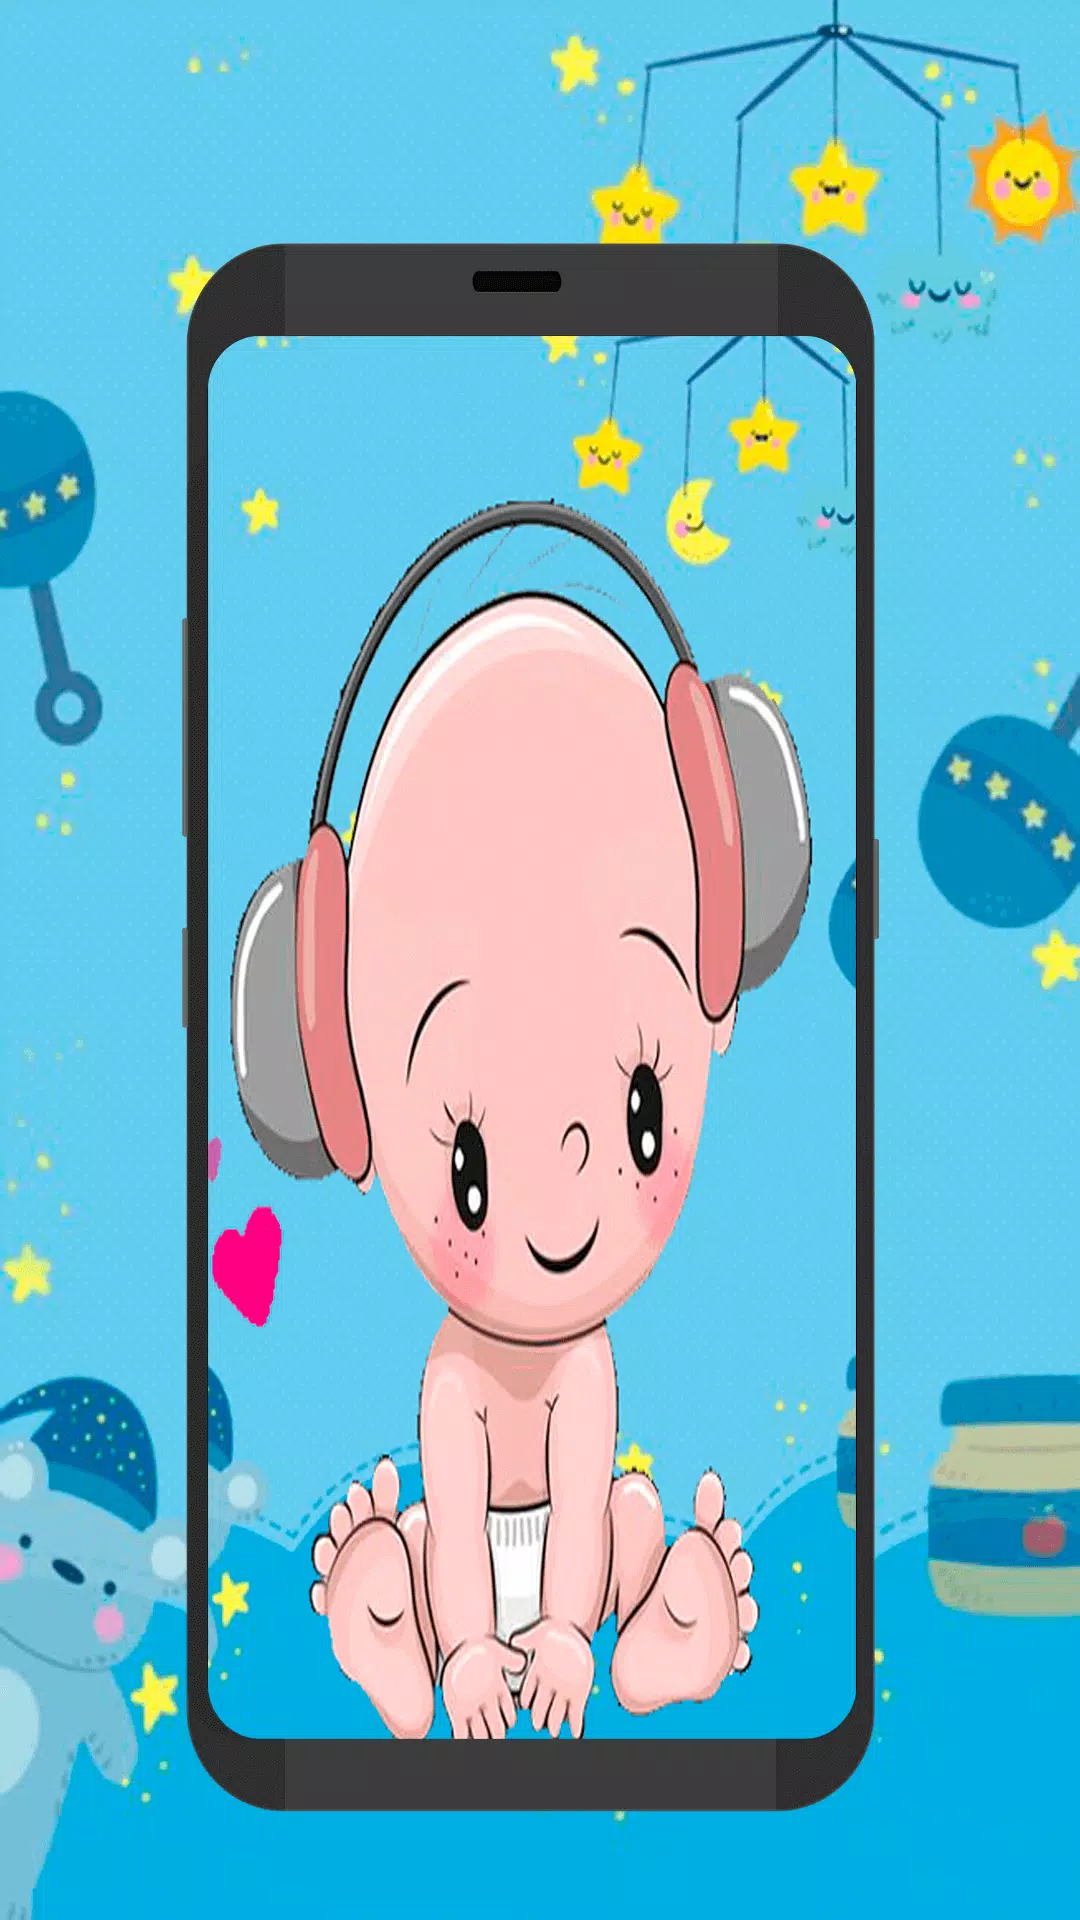 Funny Baby Ringtones APK for Android Download